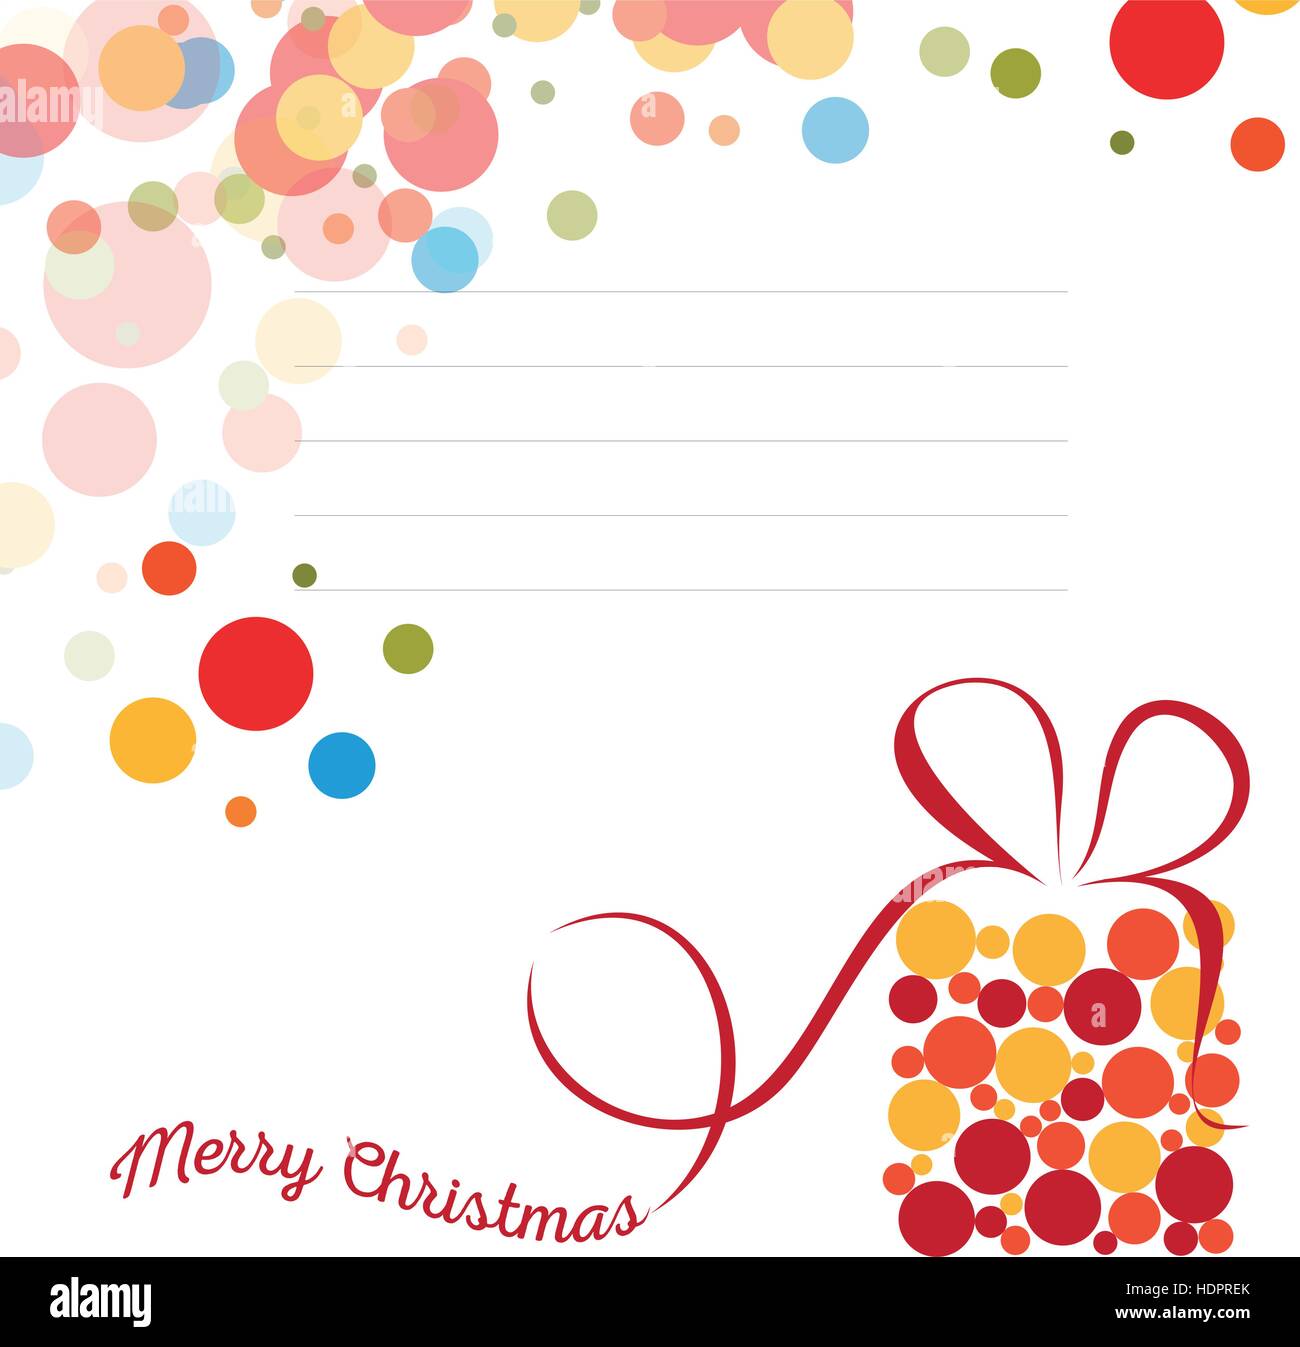 Isolated abstract colorful merry christmas greeting card on white background. Xmas present with bubbles backdrop. New year gift wrapping paper. Festive texture. Vector illustration. Stock Vector